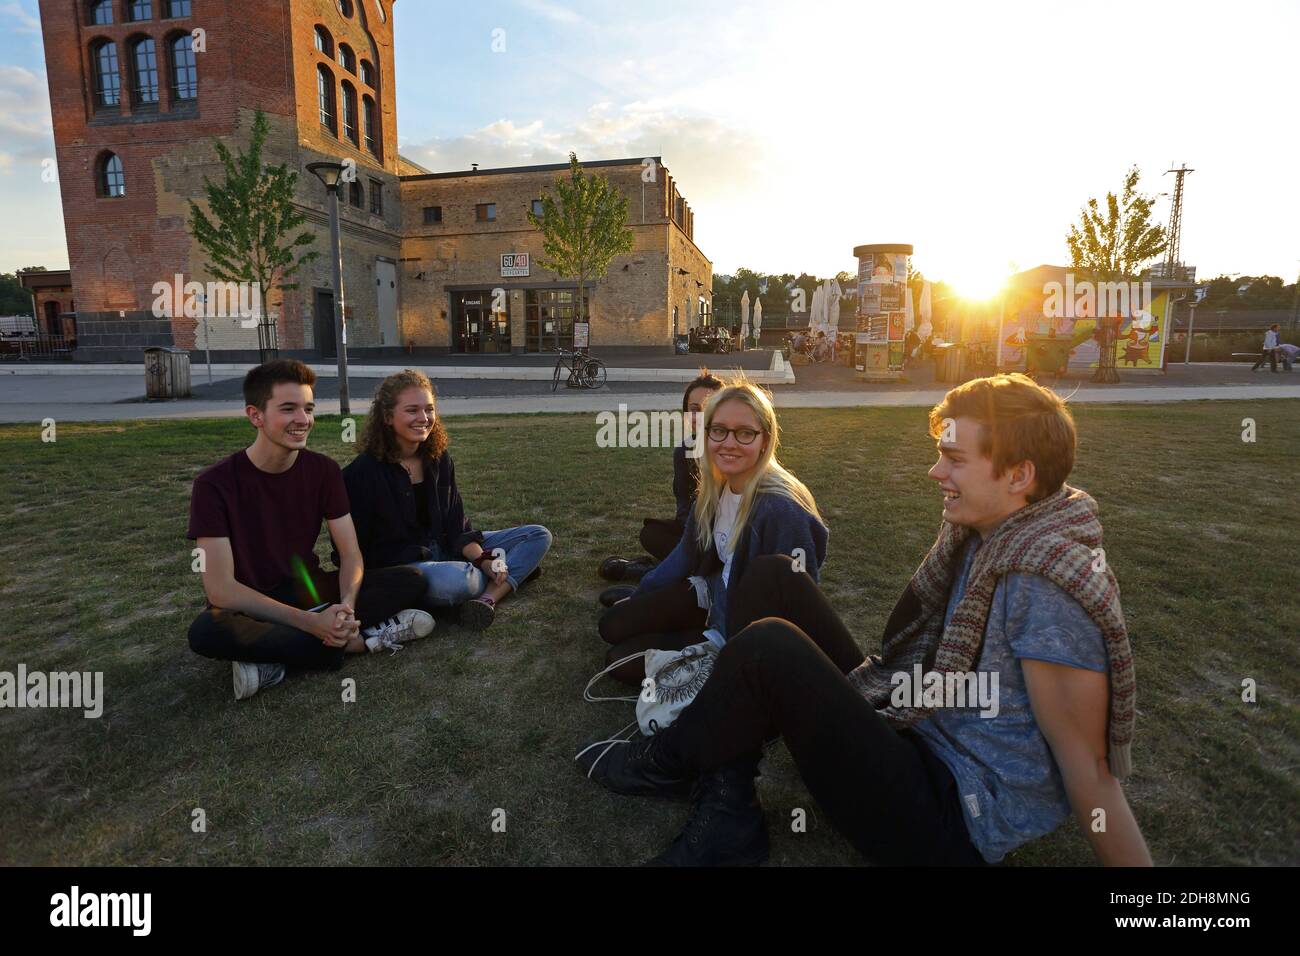 Young people sitting in front of the Old Water Tower, Wiesbaden Germany rhine-main area, greater frankfurt area Stock Photo